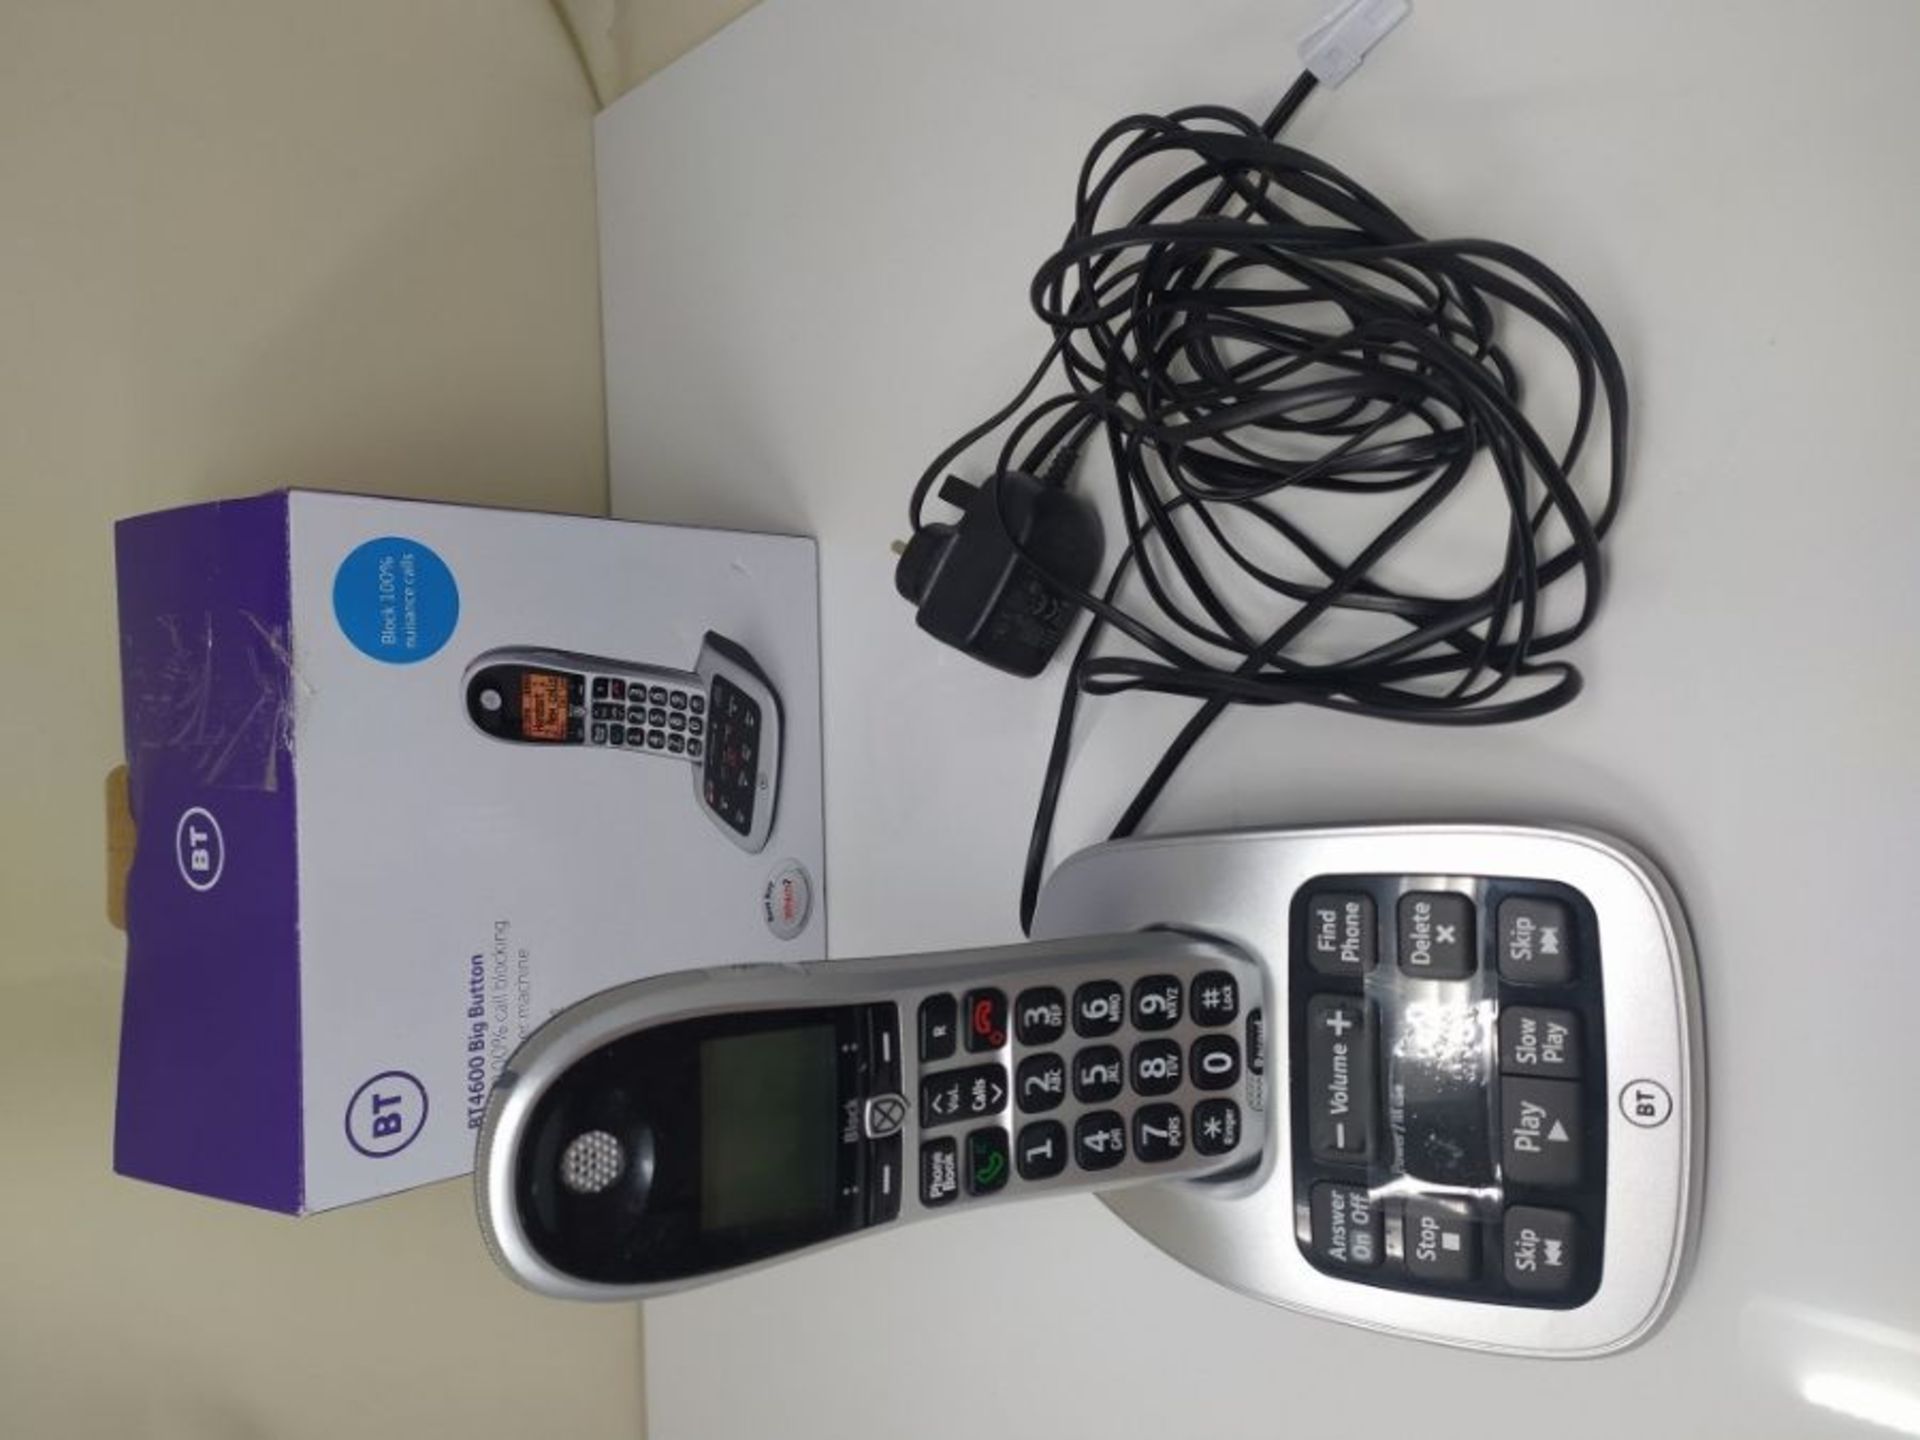 BT 4600 Big Button Advanced Call Blocker Home Phone with Answer Machine - Image 2 of 2